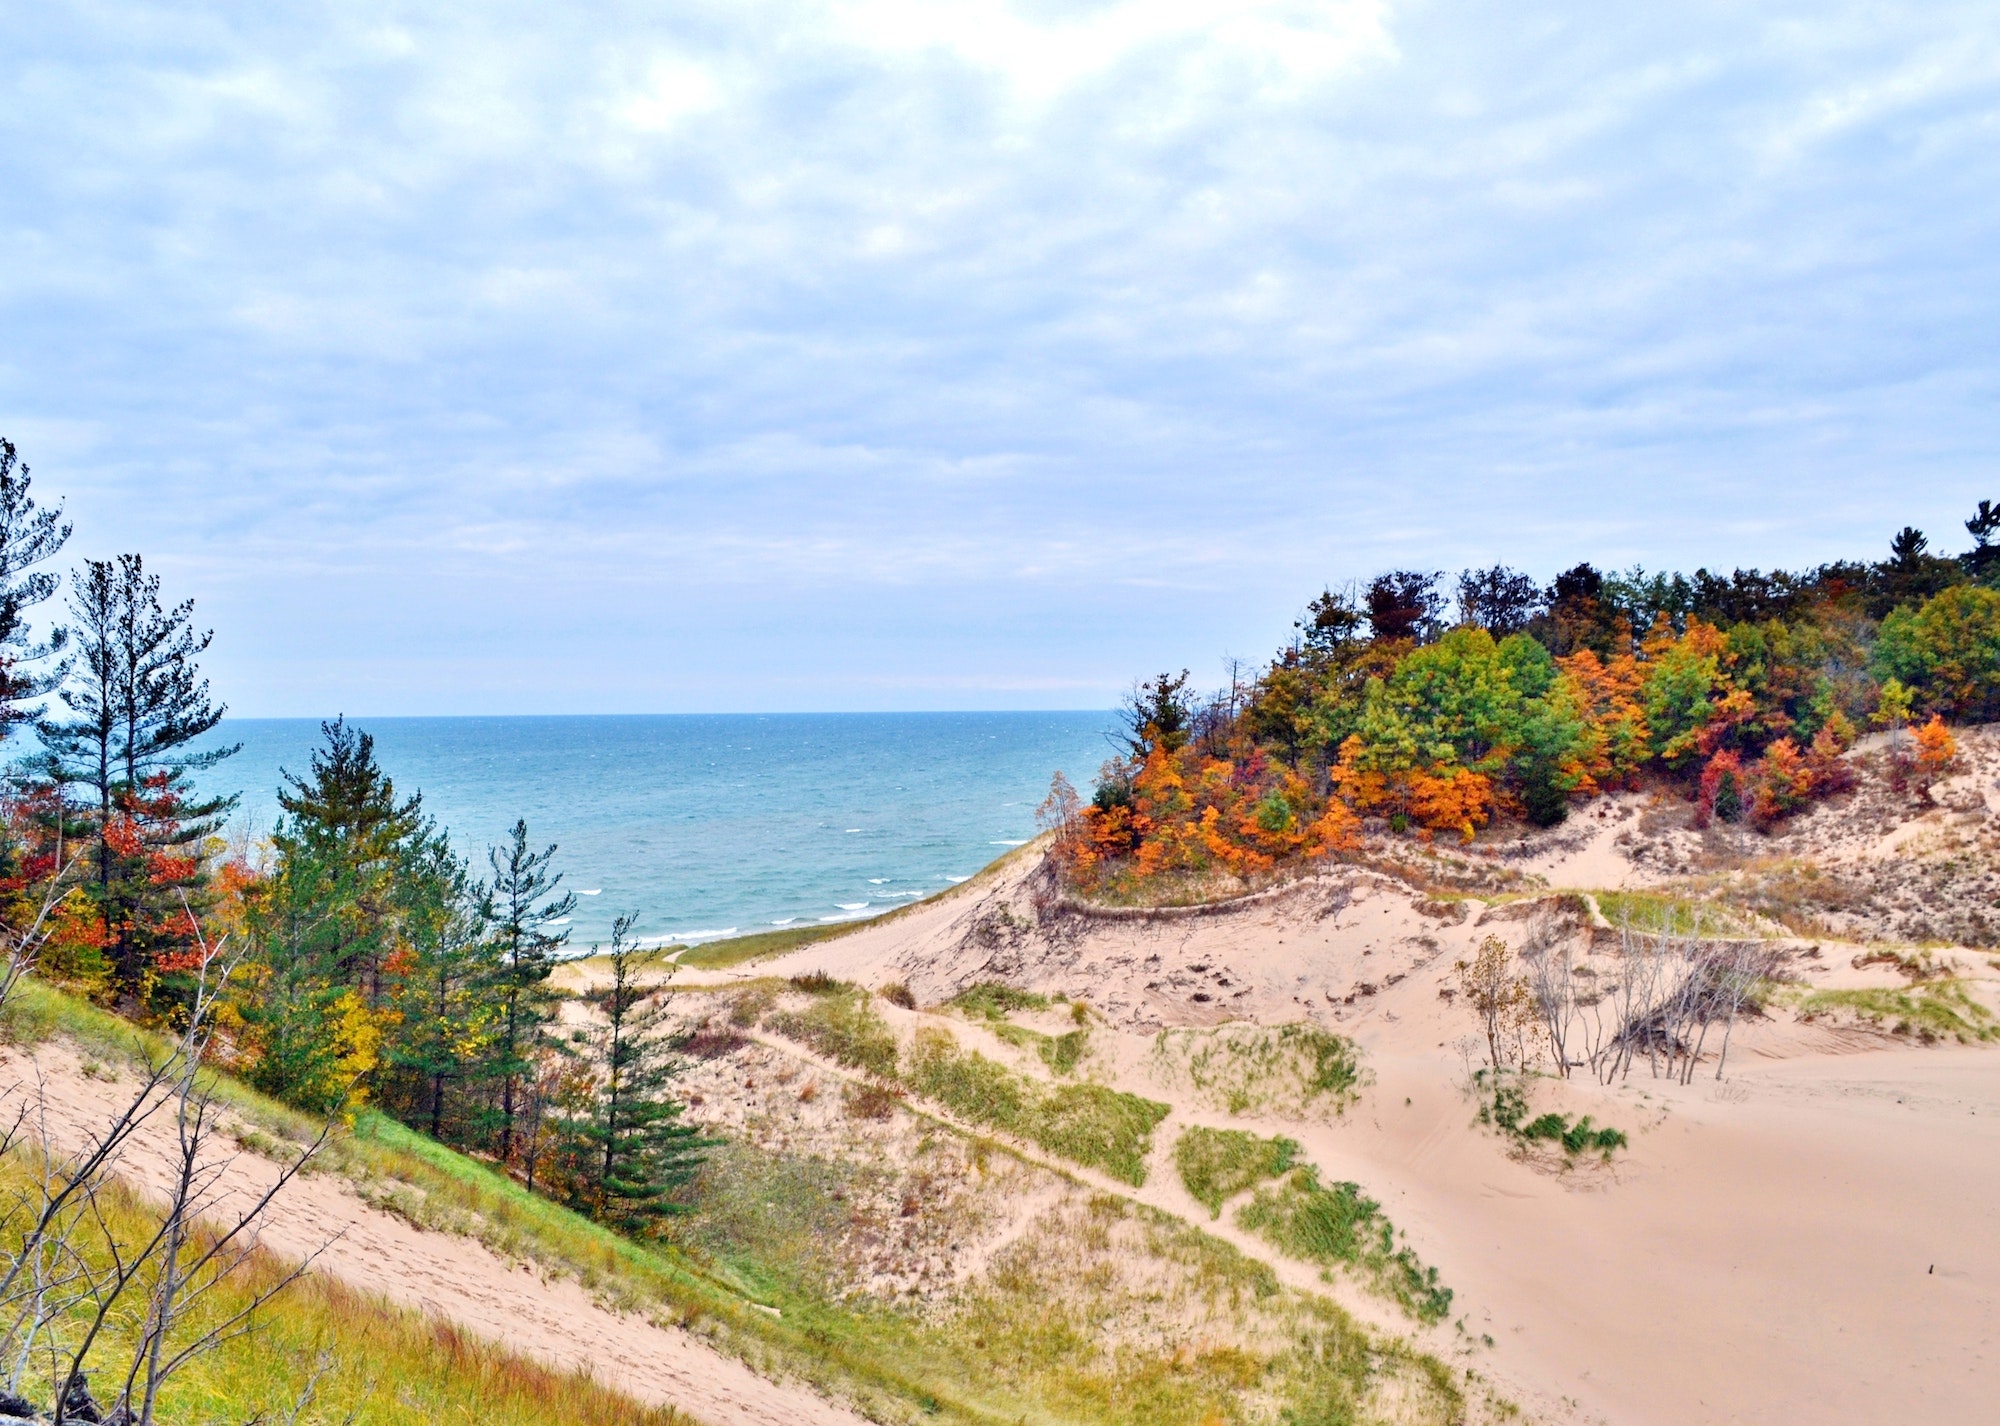 Sand dunes on Lake Michigan in the Fall